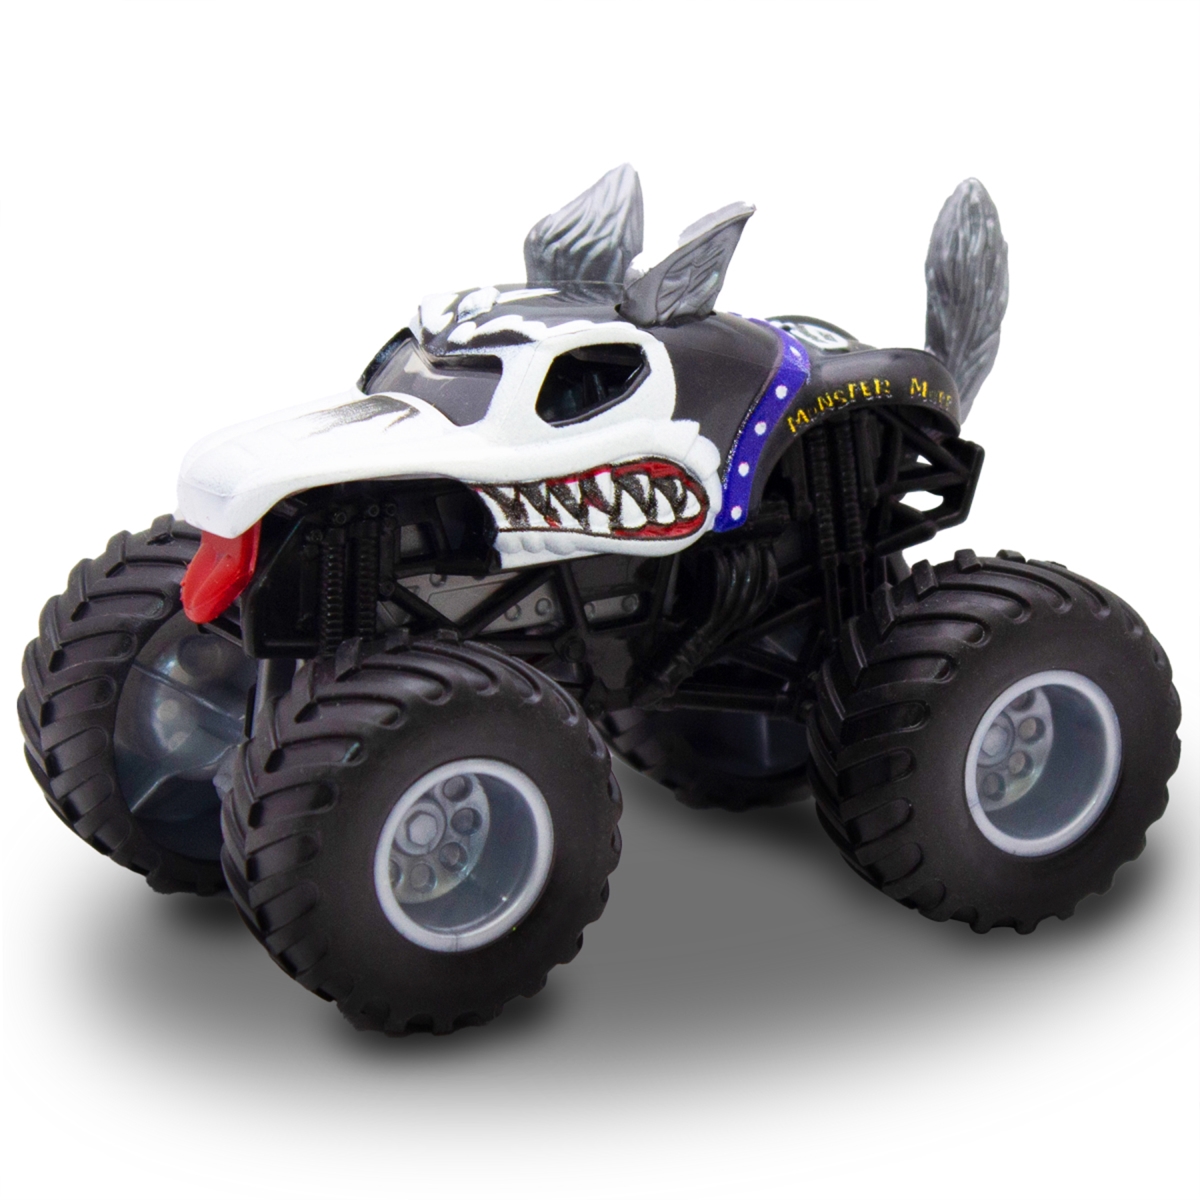 Picture of Zummy FS1149-M2 Off-Road Model Pickup Truck Toy